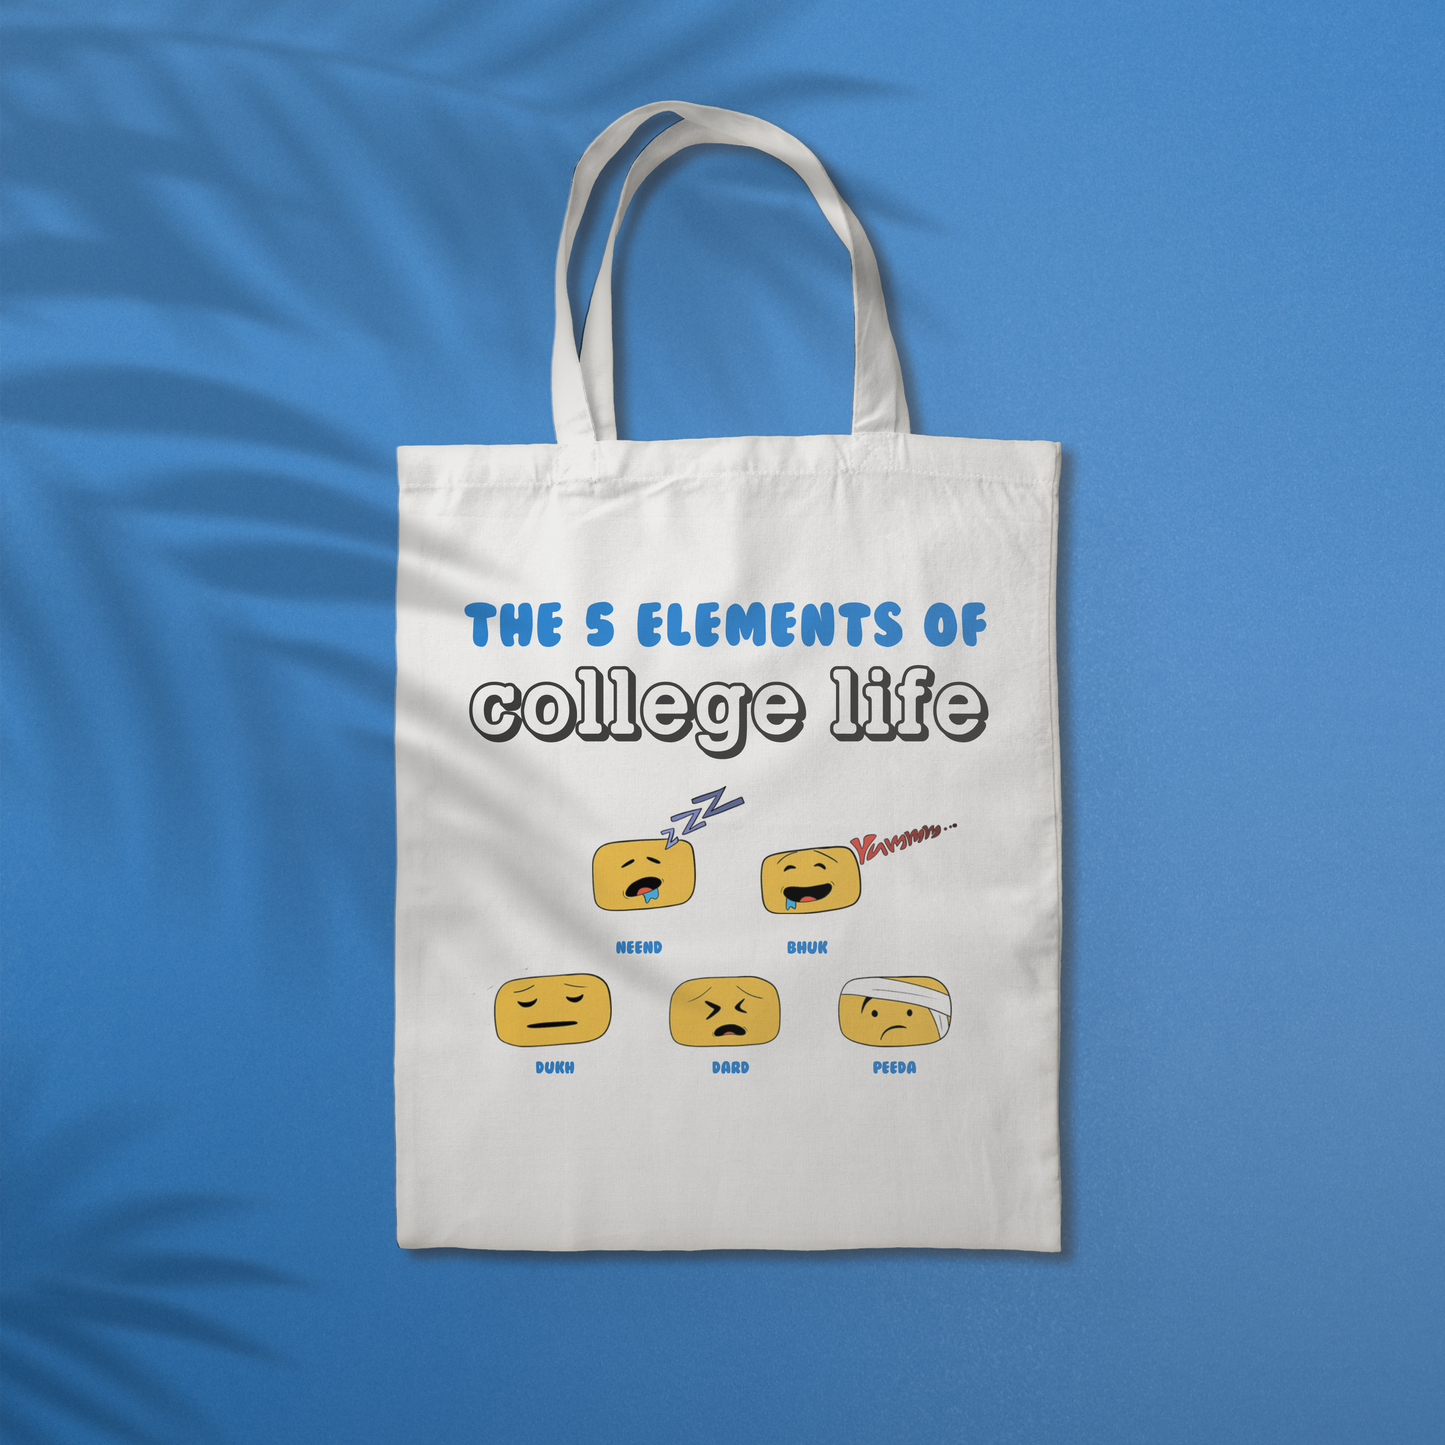 5 elements of college life (Totebag) by huihui